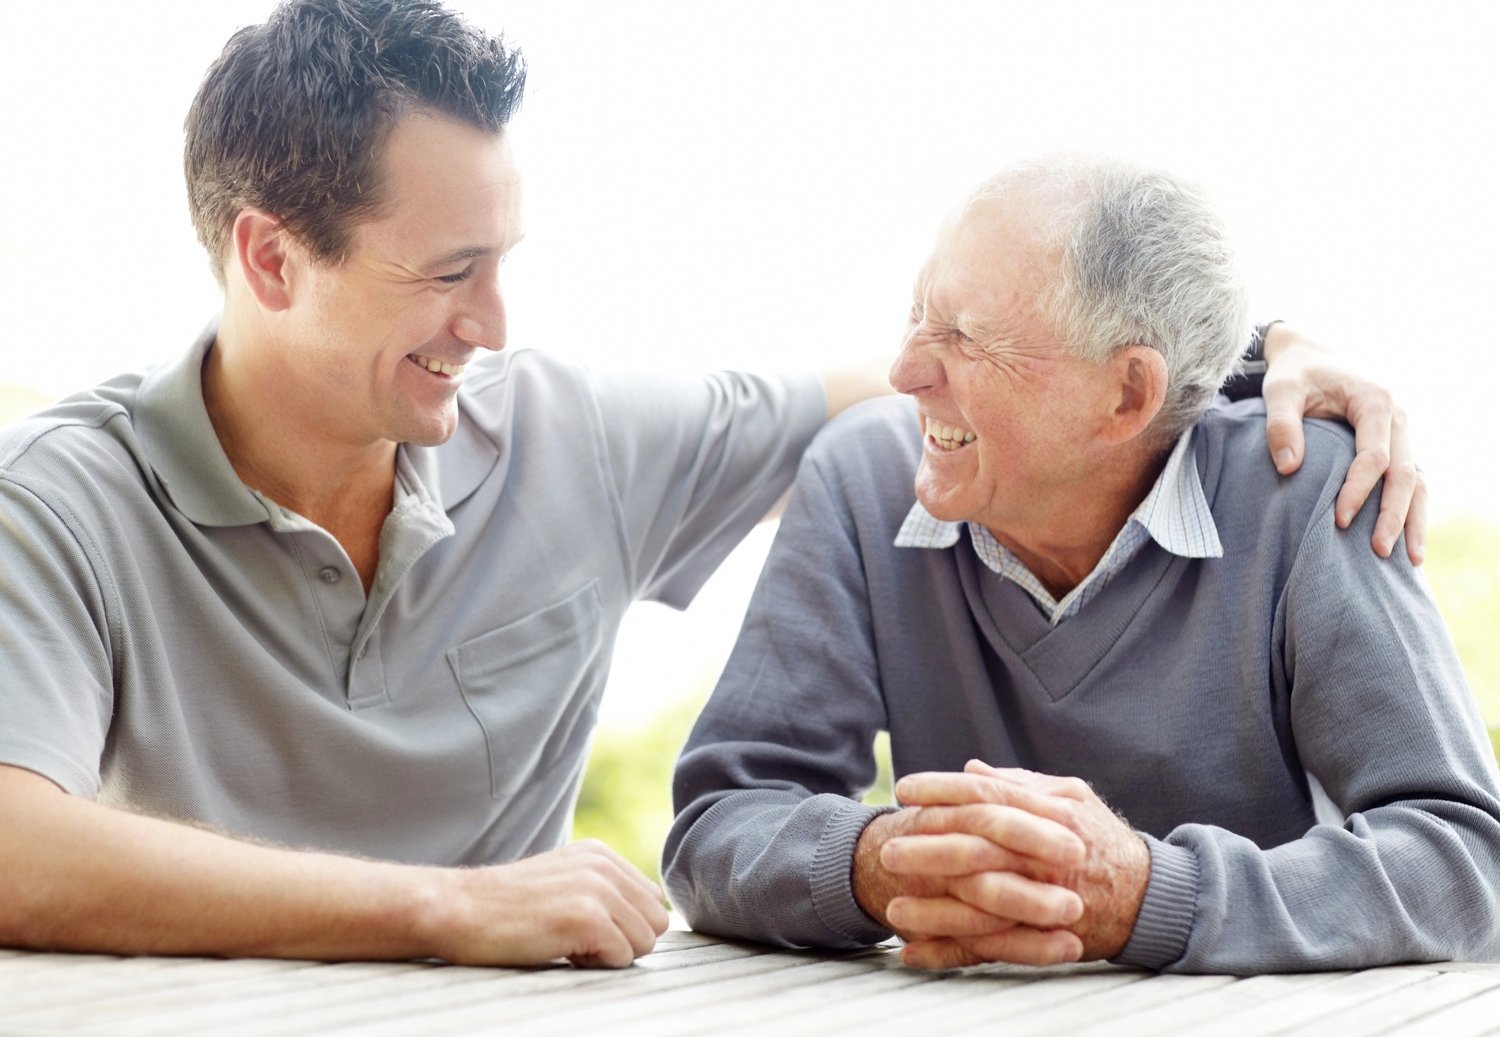 A team member sitting with his arm around the shoulders of a senior resident